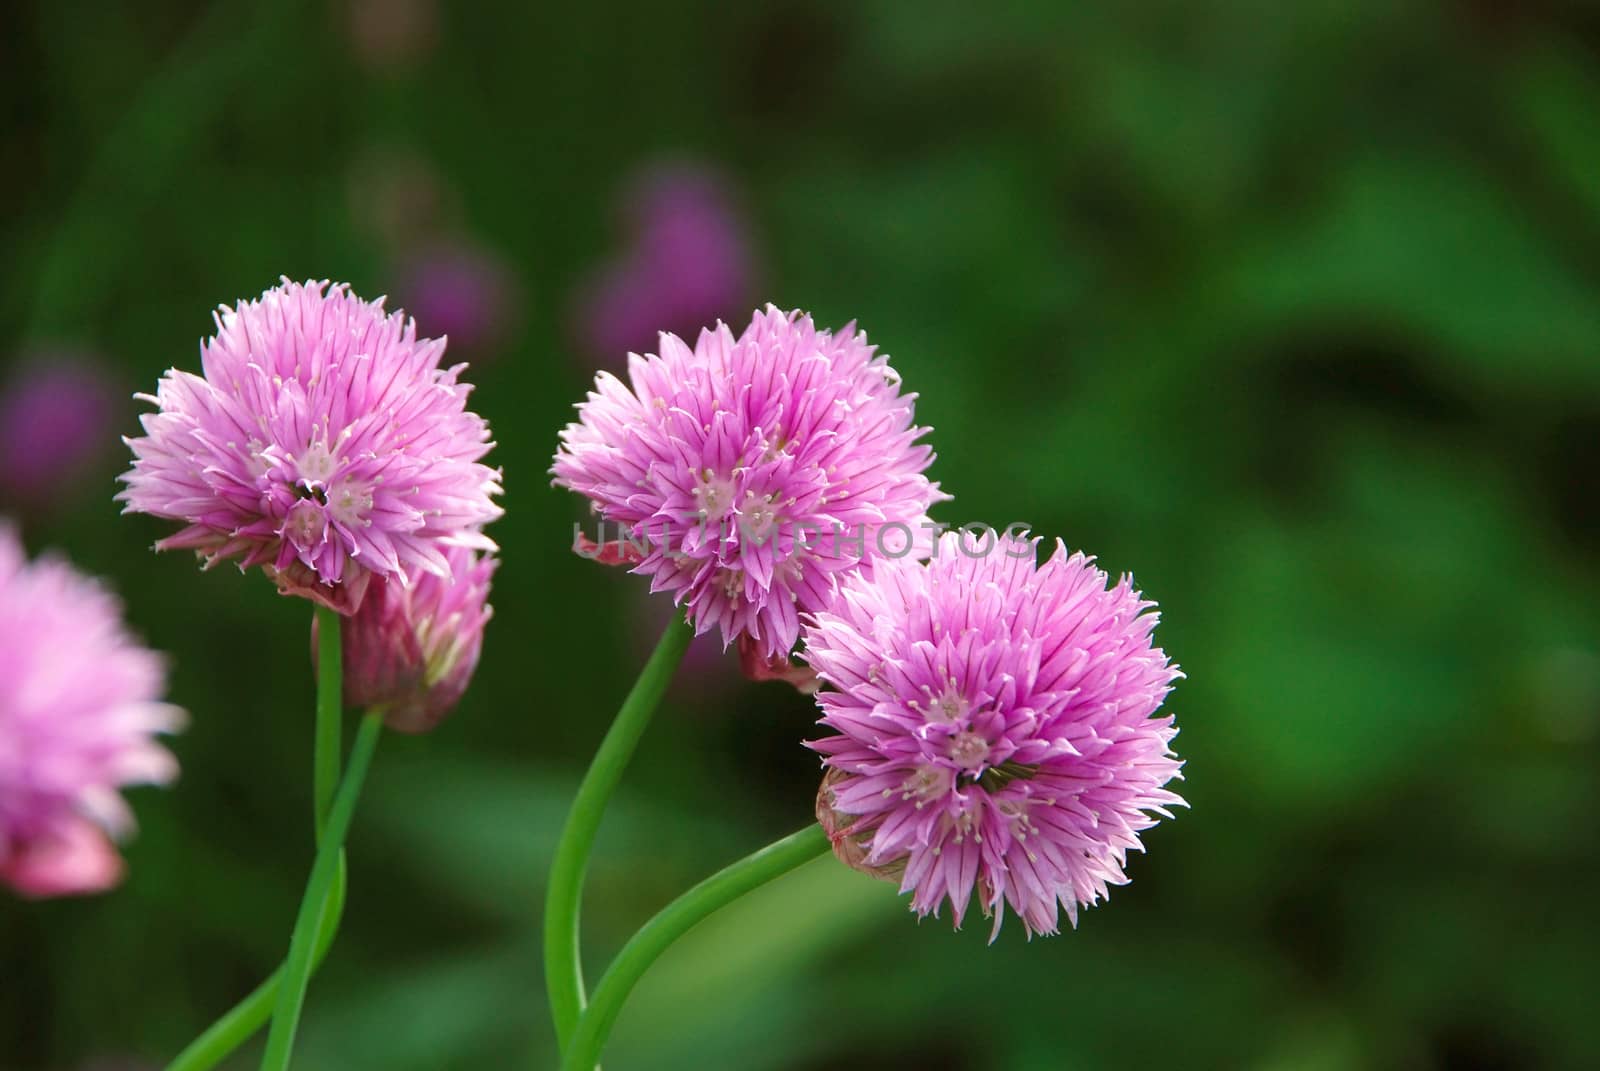 Closeup of three delicate pink blooms on a chive plant